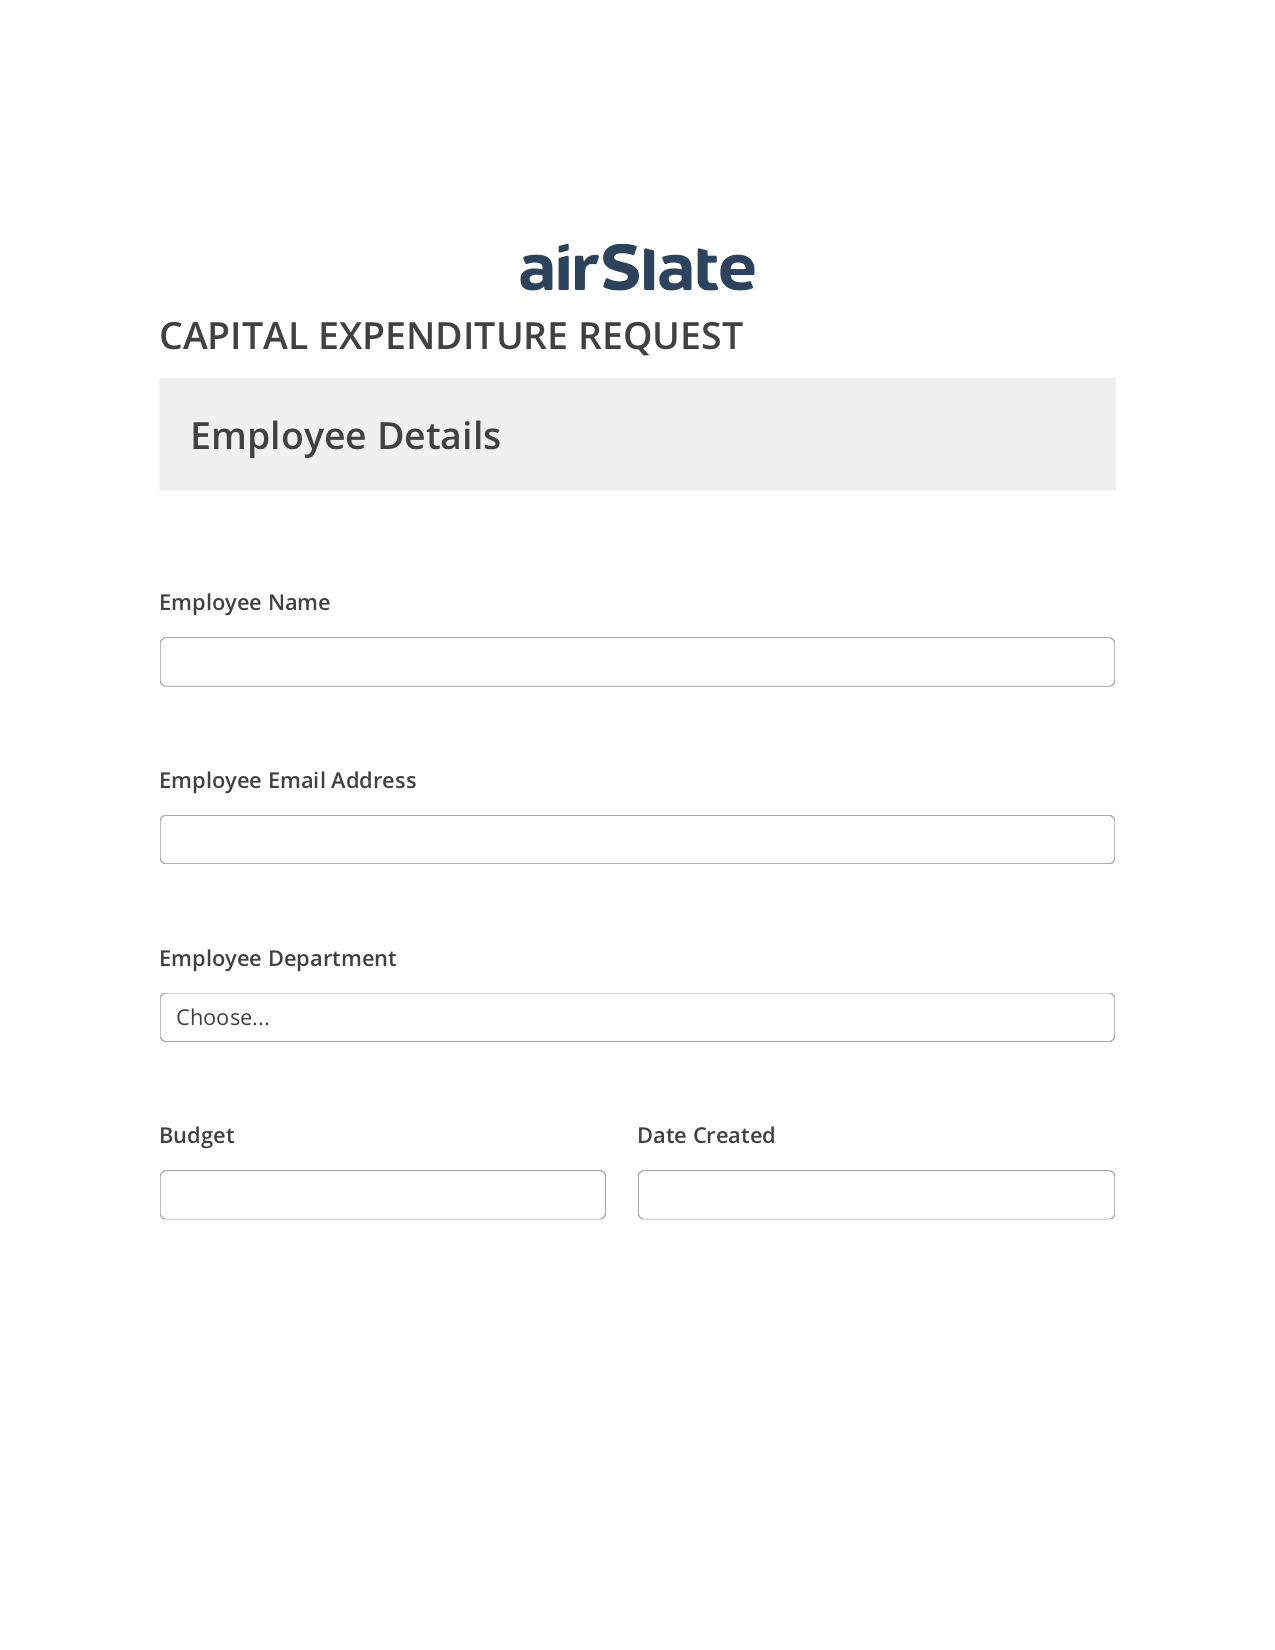 Capital Expenditure Request Approval Workflow Pre-fill from Smartsheet Bot, Create slate addon, Export to NetSuite Bot